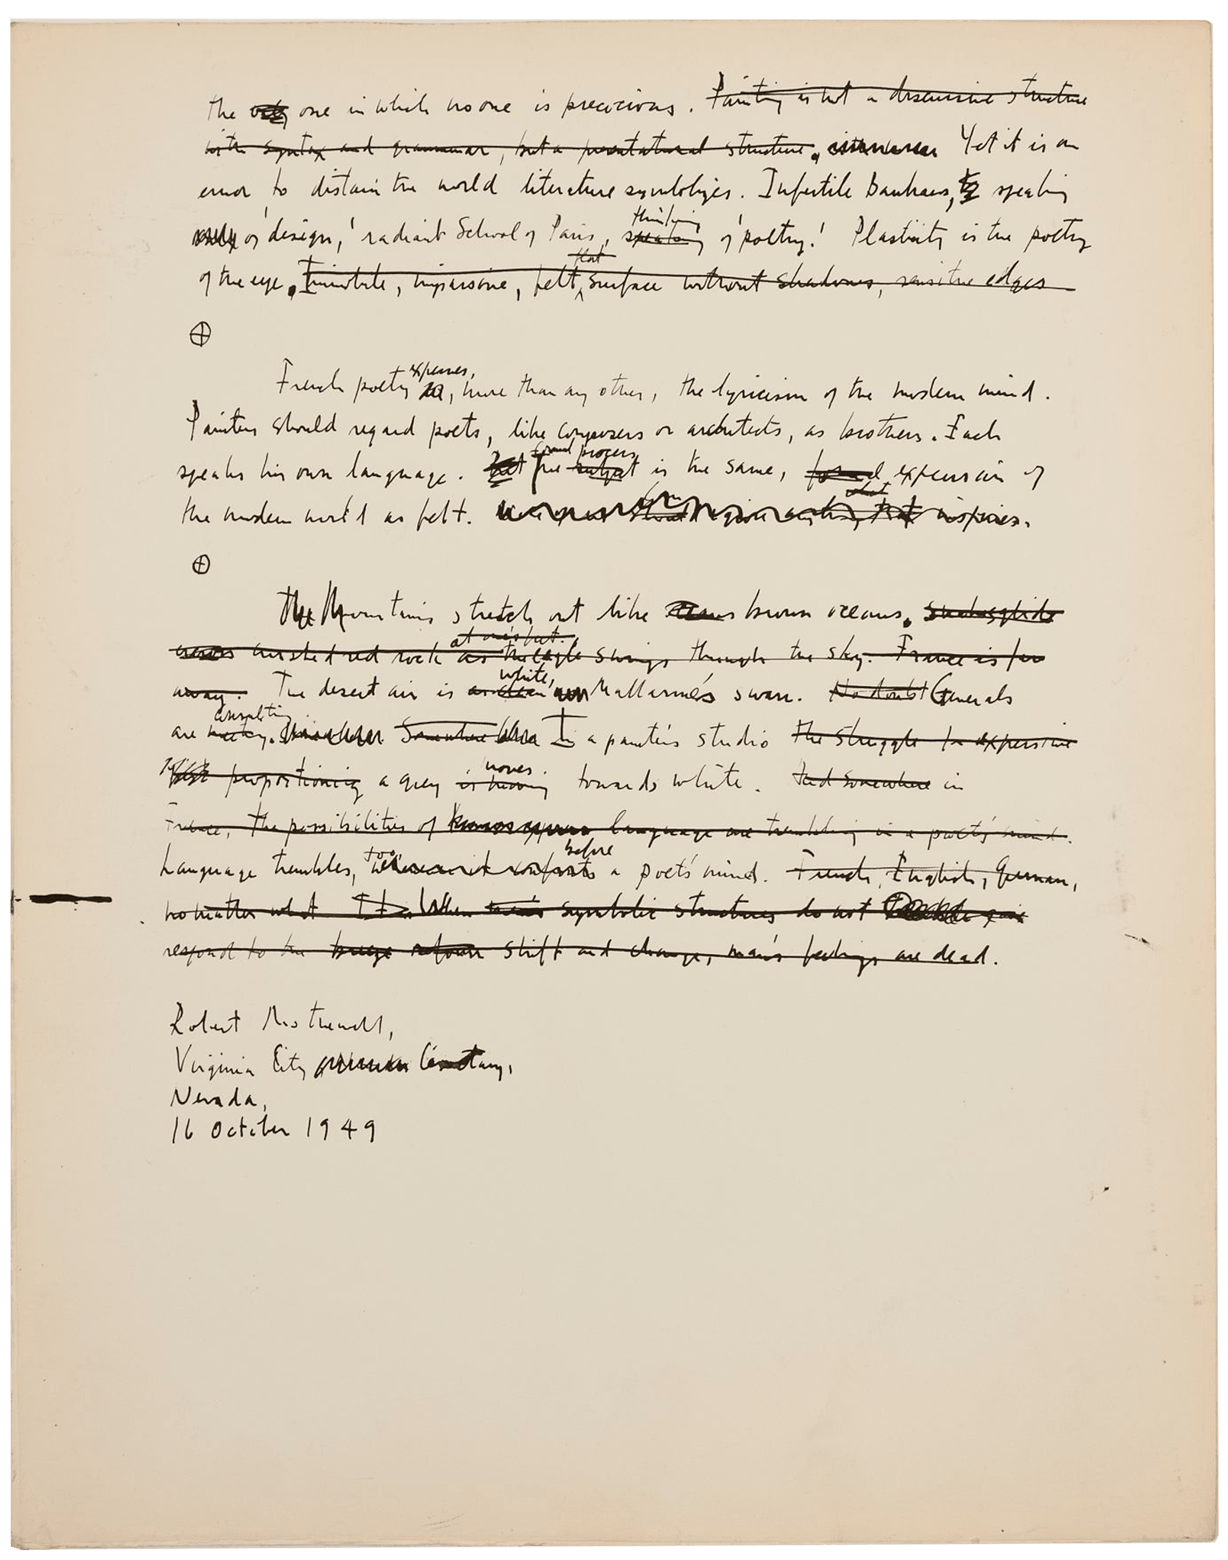 Draft of “Preliminary Notes to Marcel Raymond, “From Baudelaire to Surrealism”, 1949